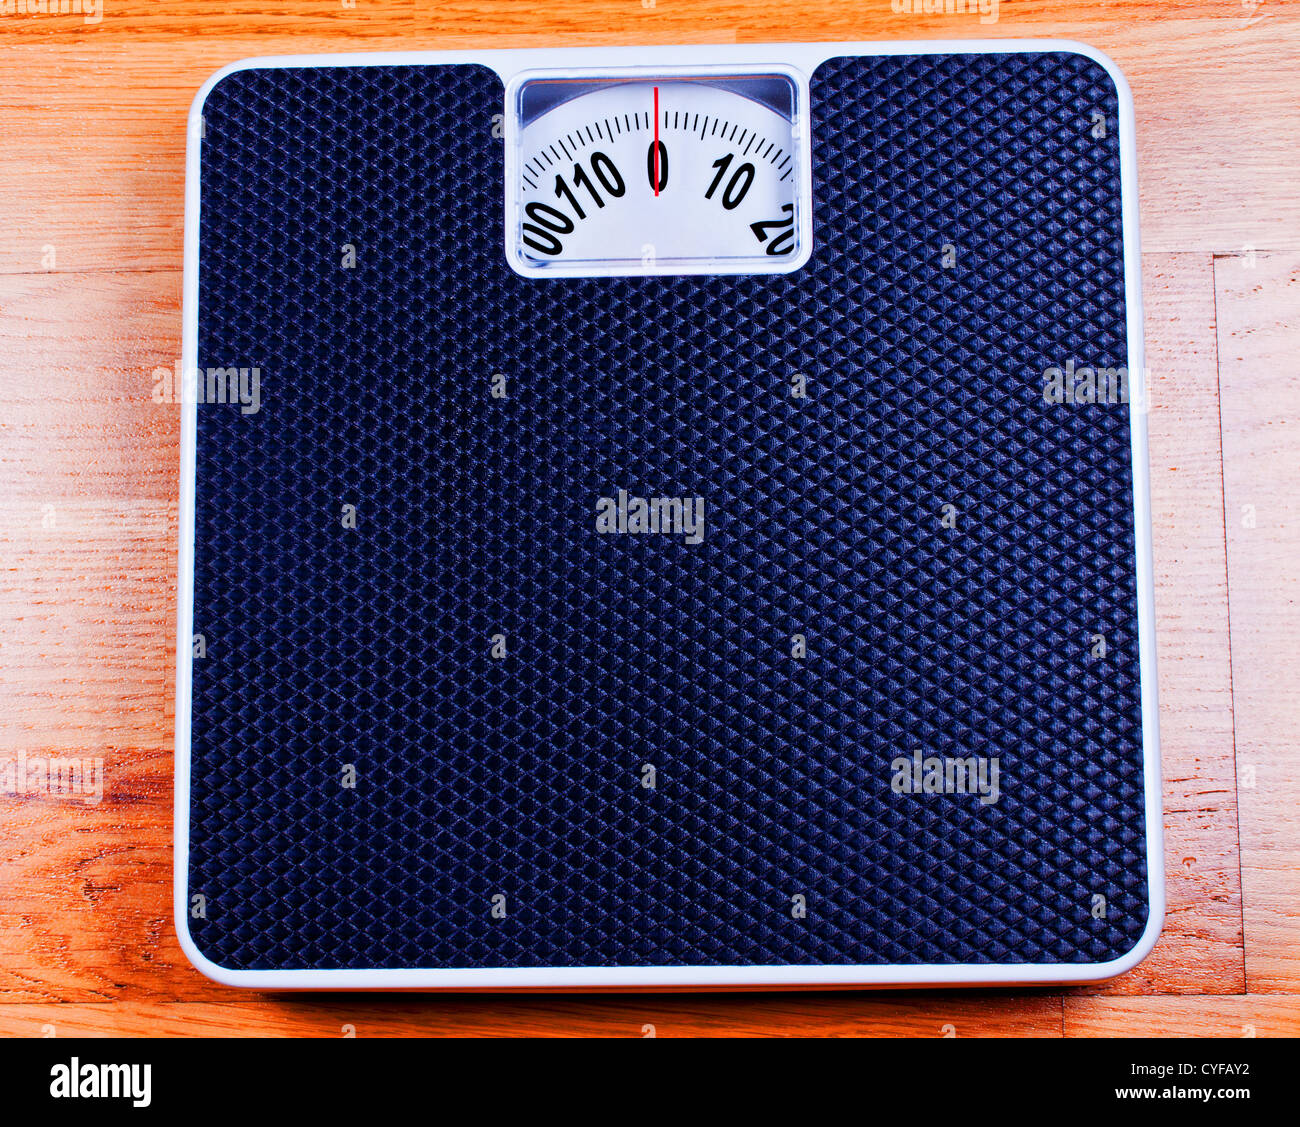 Bathroom Scale close up on plywood Stock Photo